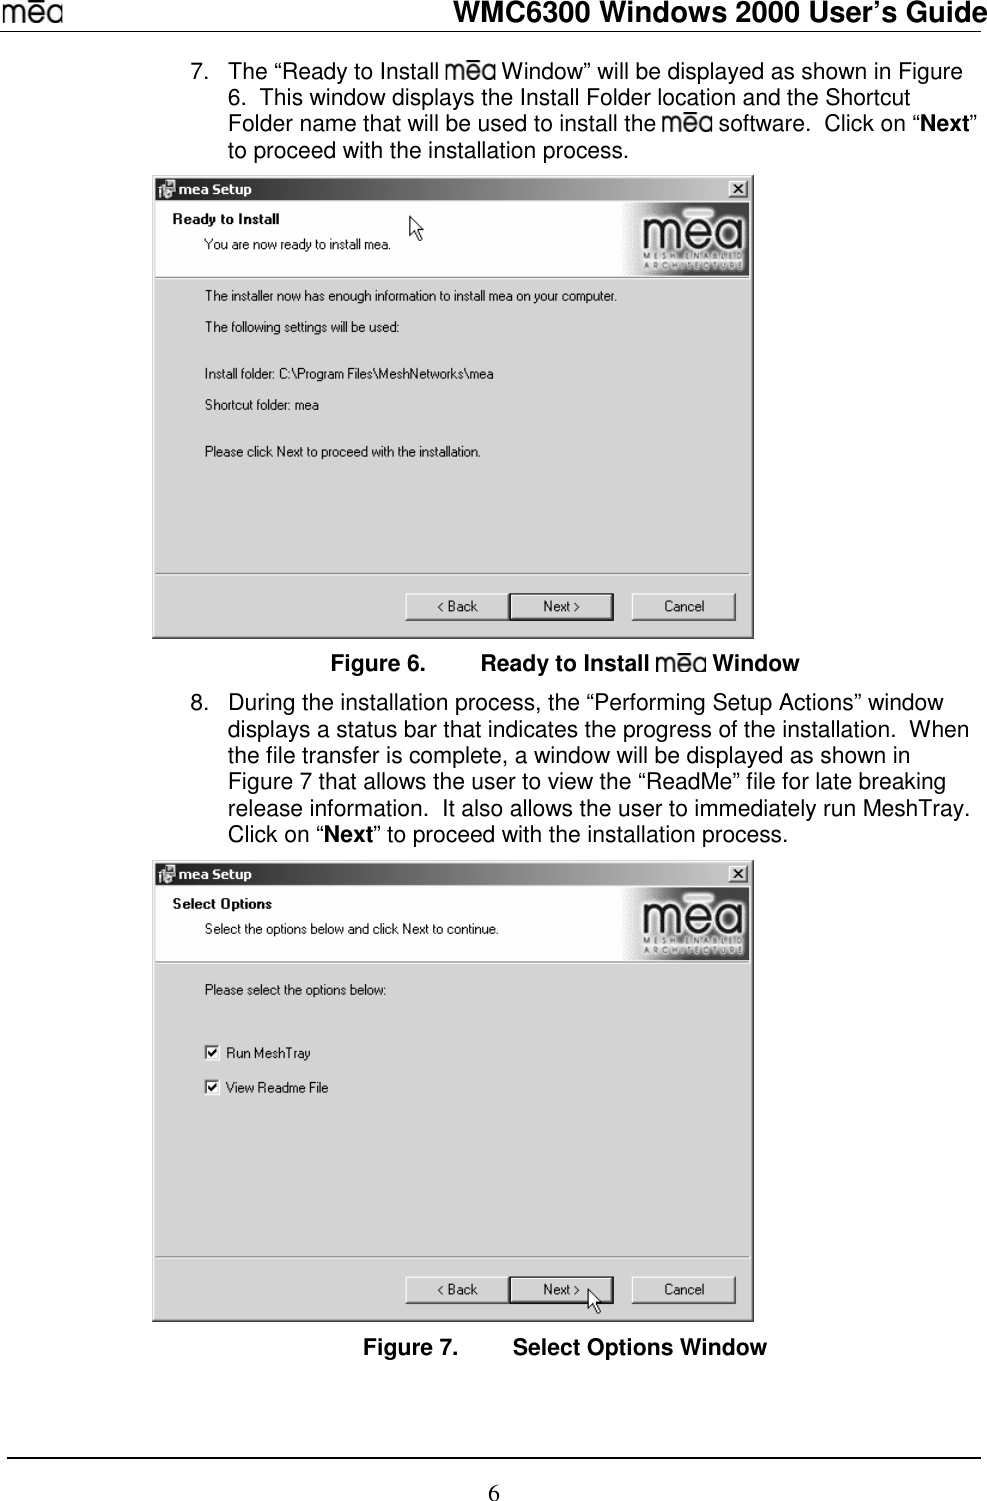   WMC6300 Windows 2000 User’s Guide 6 7.  The “Ready to Install   Window” will be displayed as shown in Figure 6.  This window displays the Install Folder location and the Shortcut Folder name that will be used to install the   software.  Click on “Next” to proceed with the installation process.    Figure 6.  Ready to Install   Window 8.  During the installation process, the “Performing Setup Actions” window displays a status bar that indicates the progress of the installation.  When the file transfer is complete, a window will be displayed as shown in Figure 7 that allows the user to view the “ReadMe” file for late breaking release information.  It also allows the user to immediately run MeshTray.  Click on “Next” to proceed with the installation process.    Figure 7.  Select Options Window 